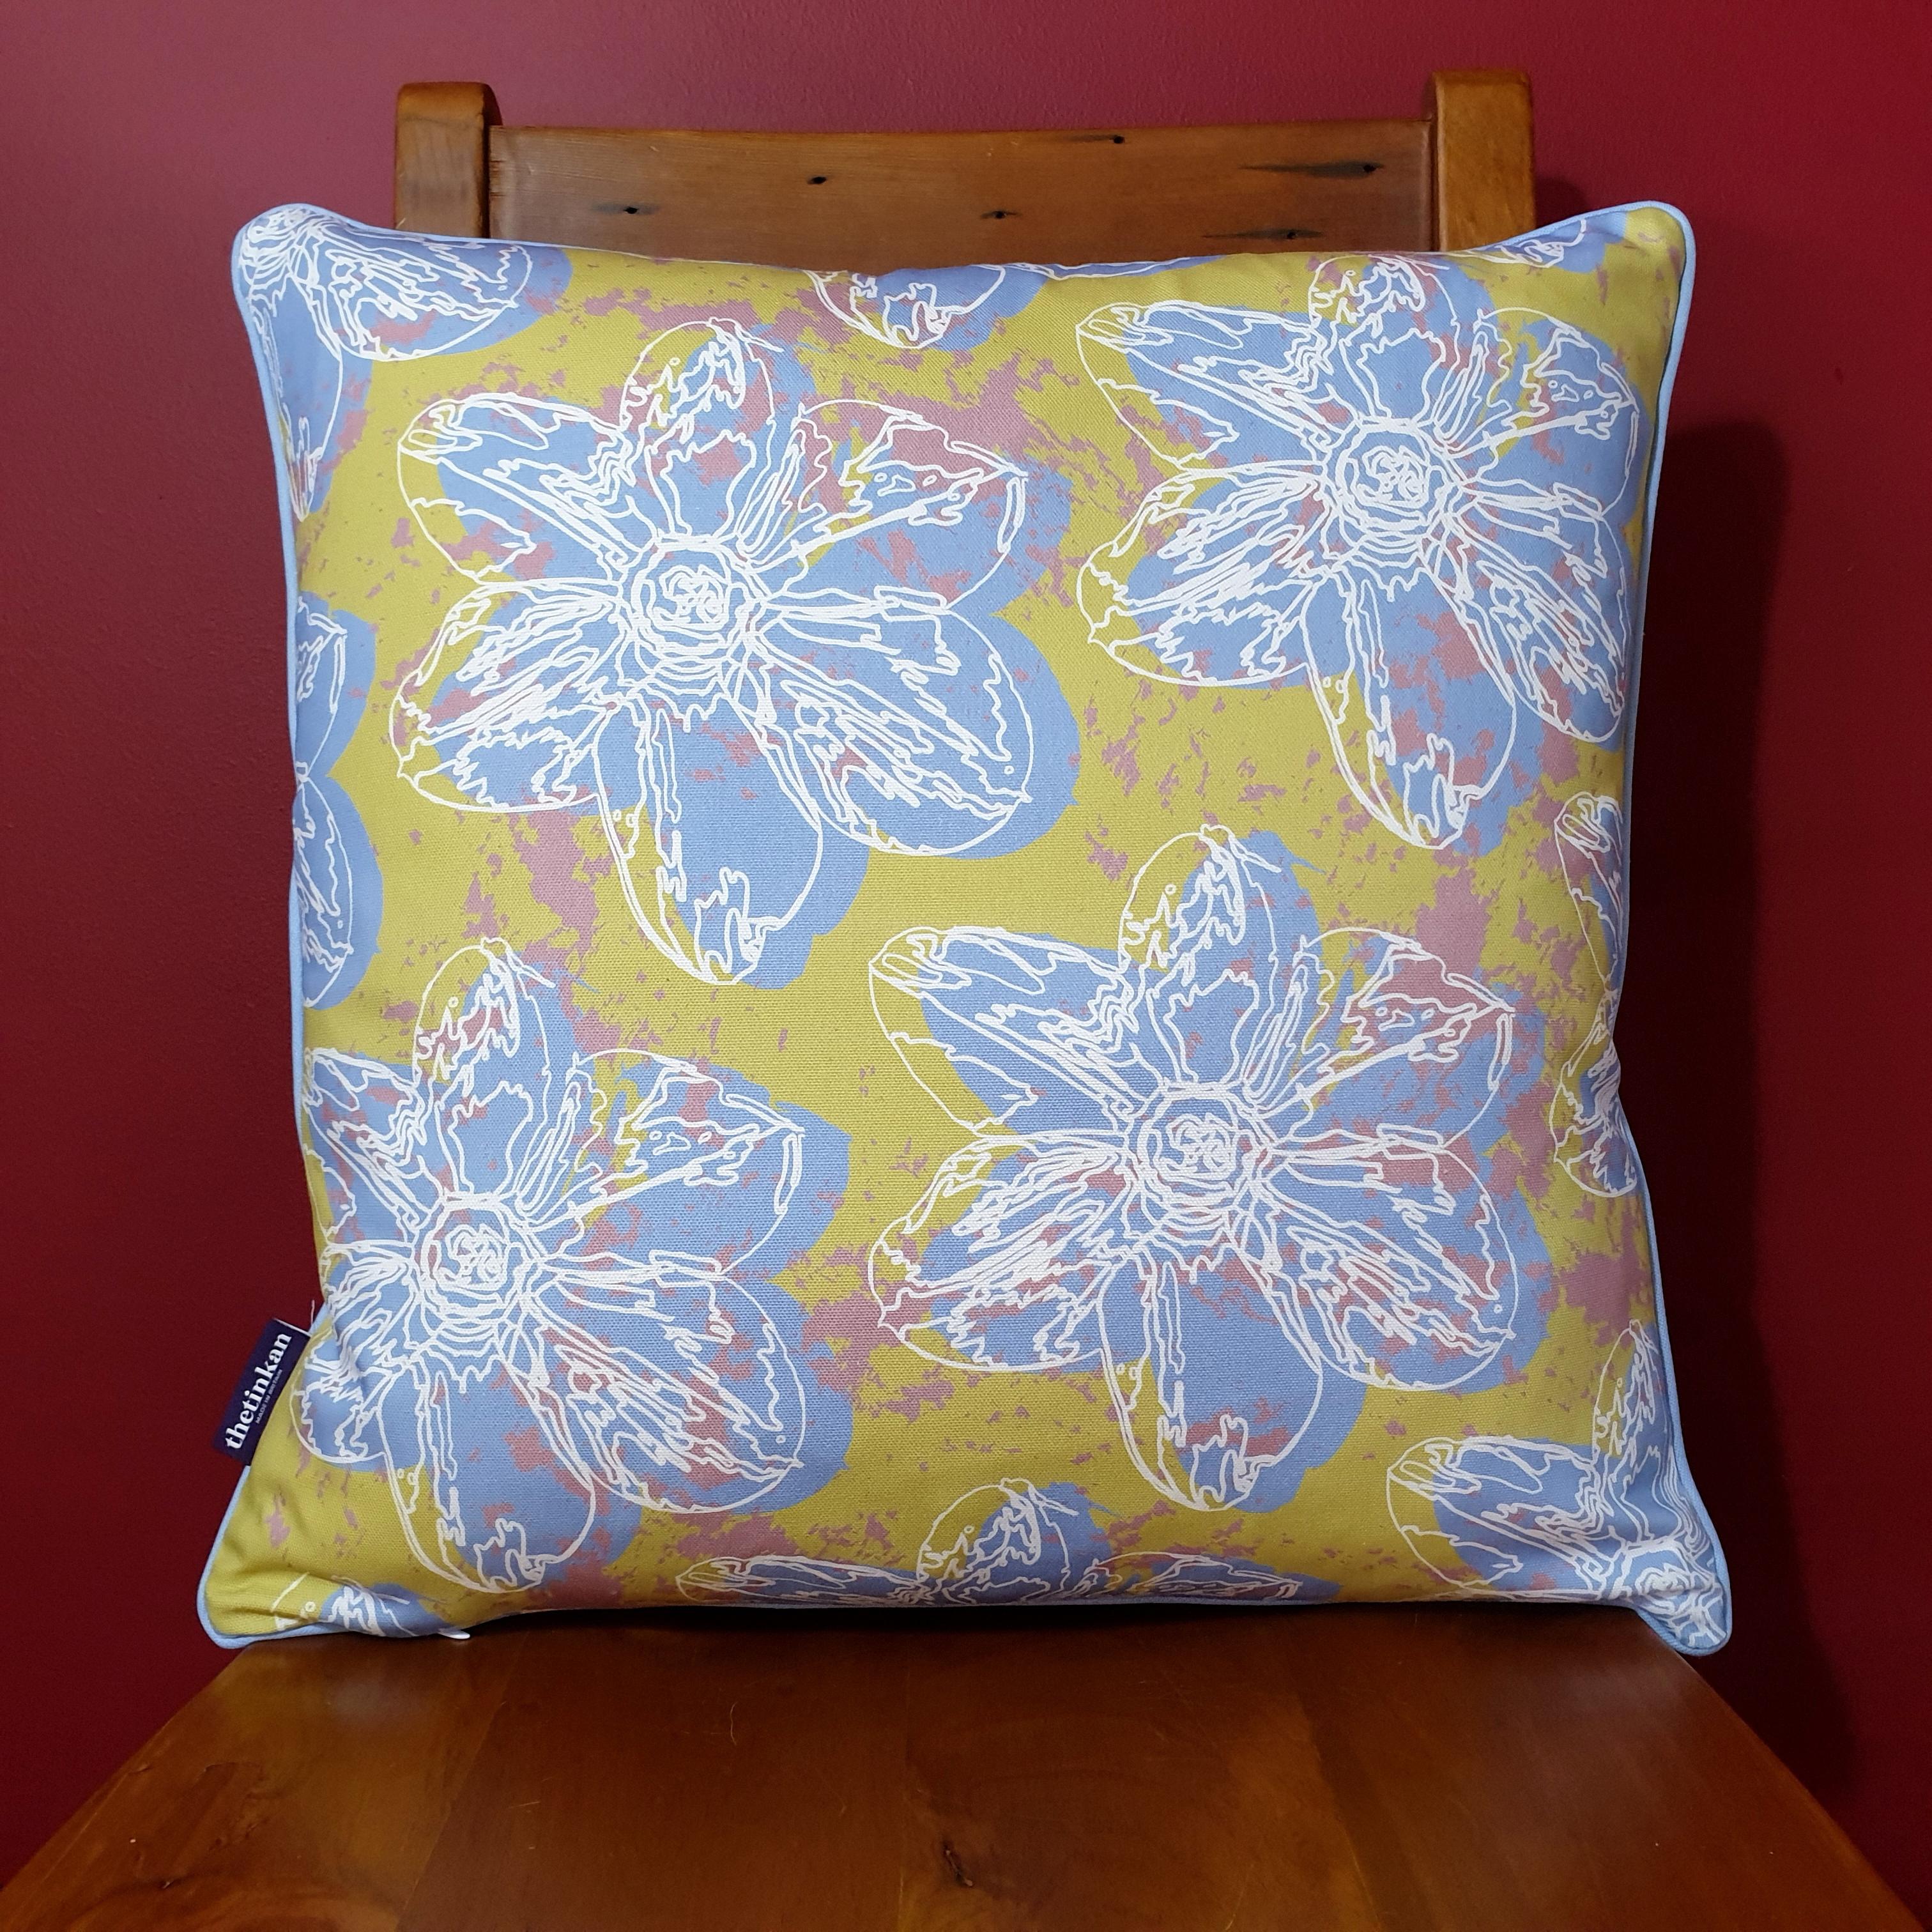 Double-sided 51cm square Flower Splash cushion designed by thetinkan. Pale blue narcissus flower and pale blue piping with white traced outline set within a light olive green background with salmon pink paint splashes. Available with an optional luxury cushion inner pad. VIEW PRODUCT >>